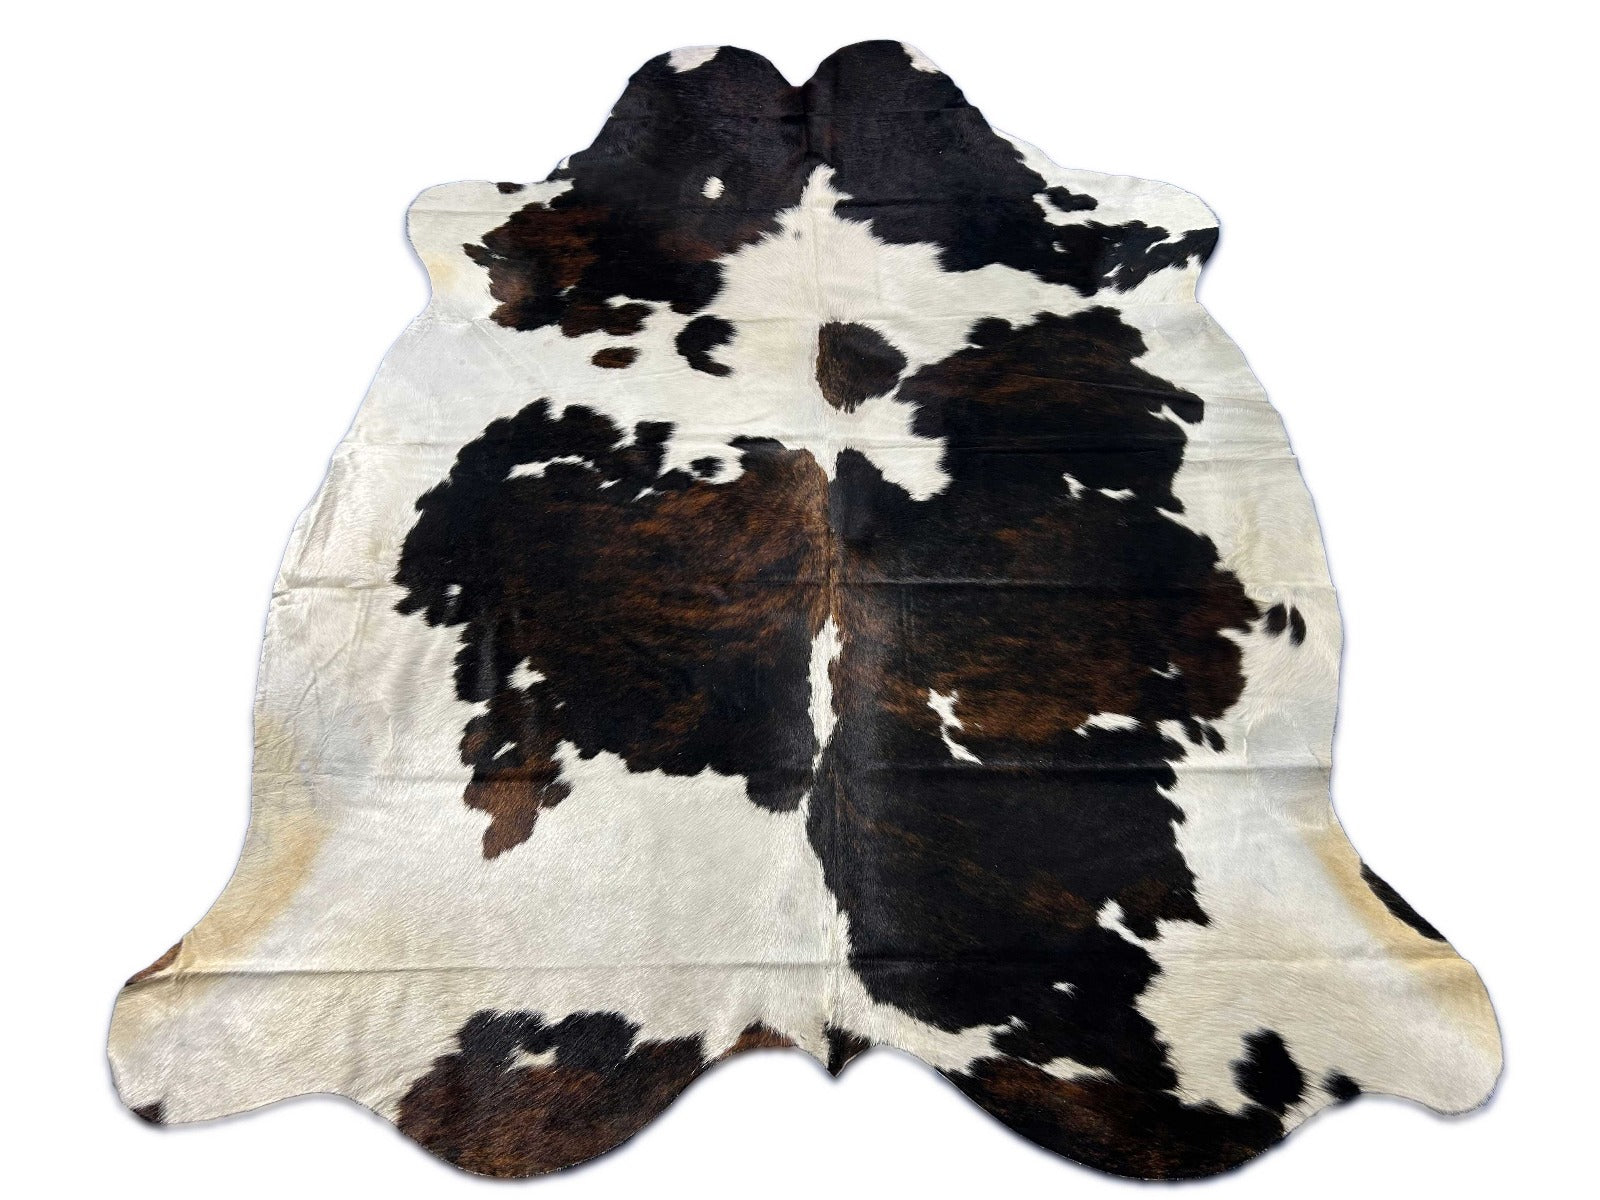 Tricolor Cowhide Rug (mainly dark tones) Size: 8x6.2 feet M-1617